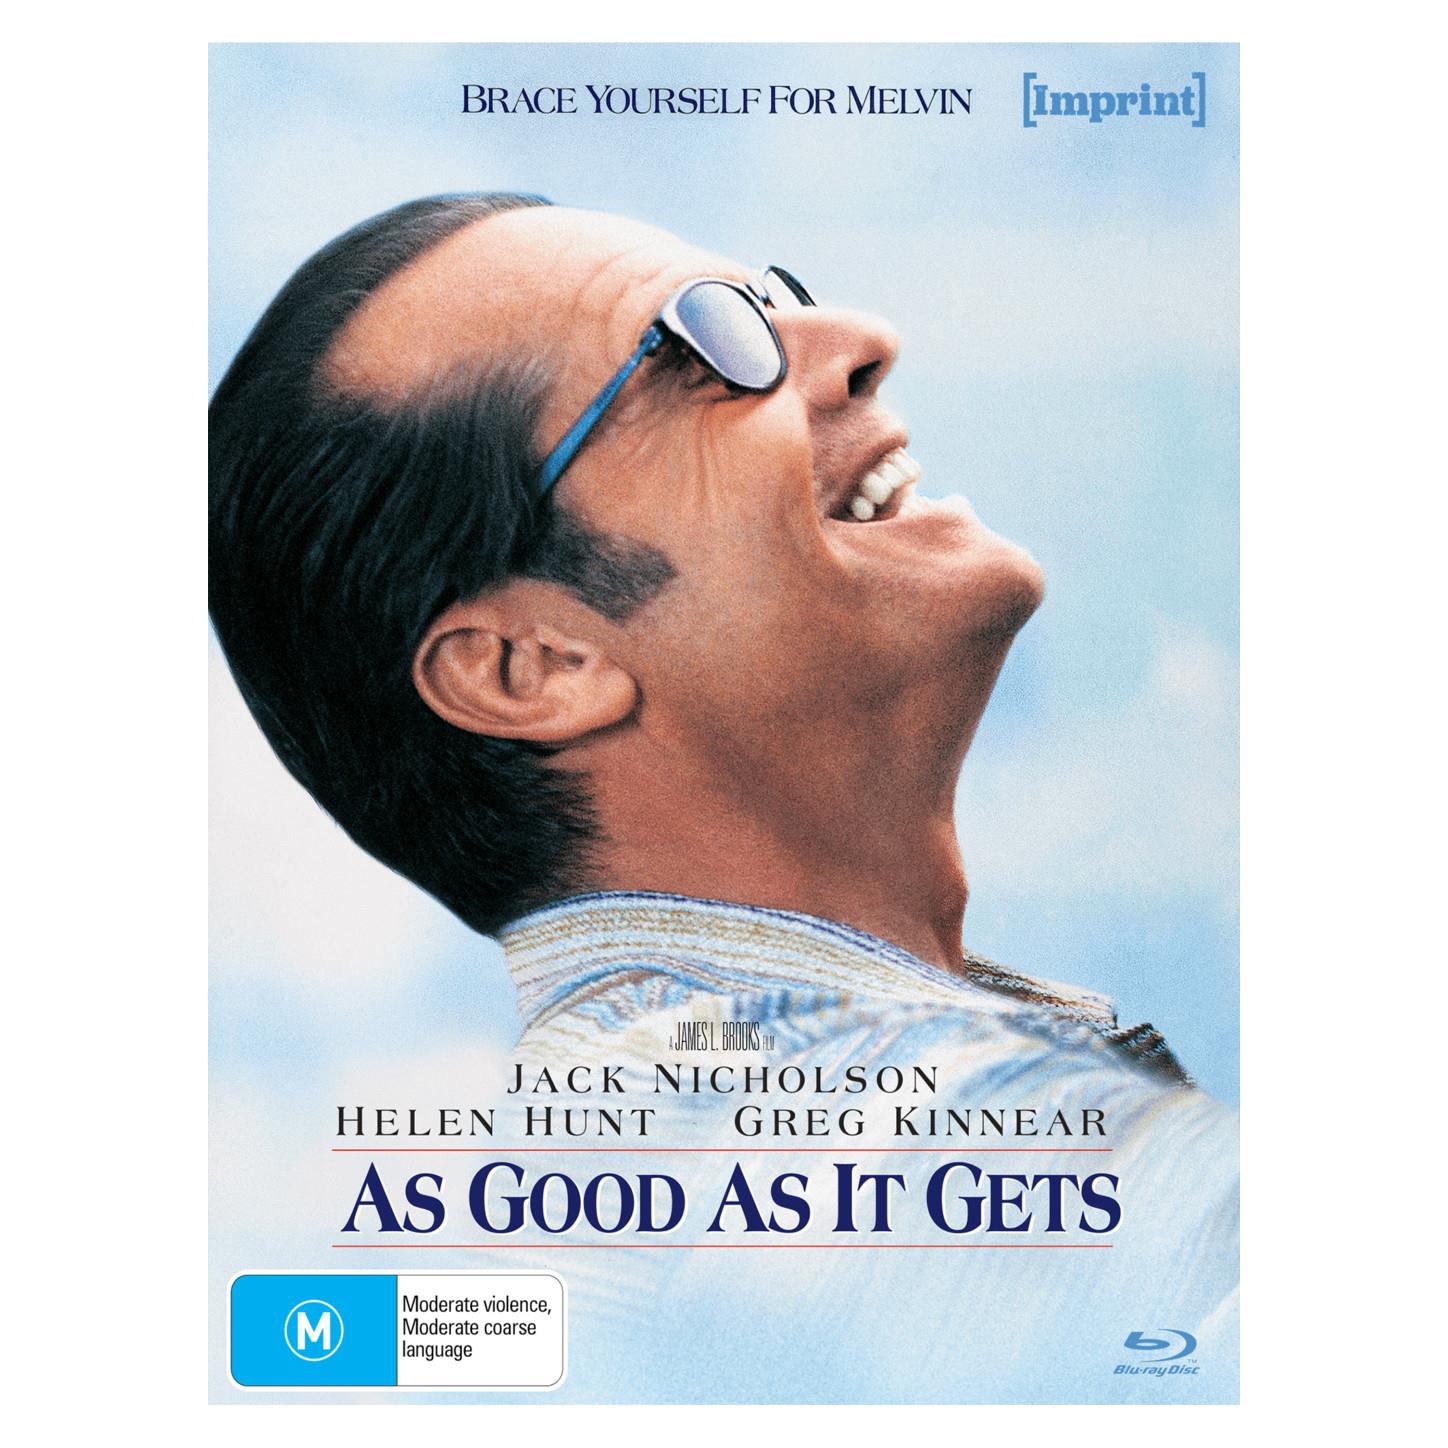 as good as it gets (imprint collection special edition)